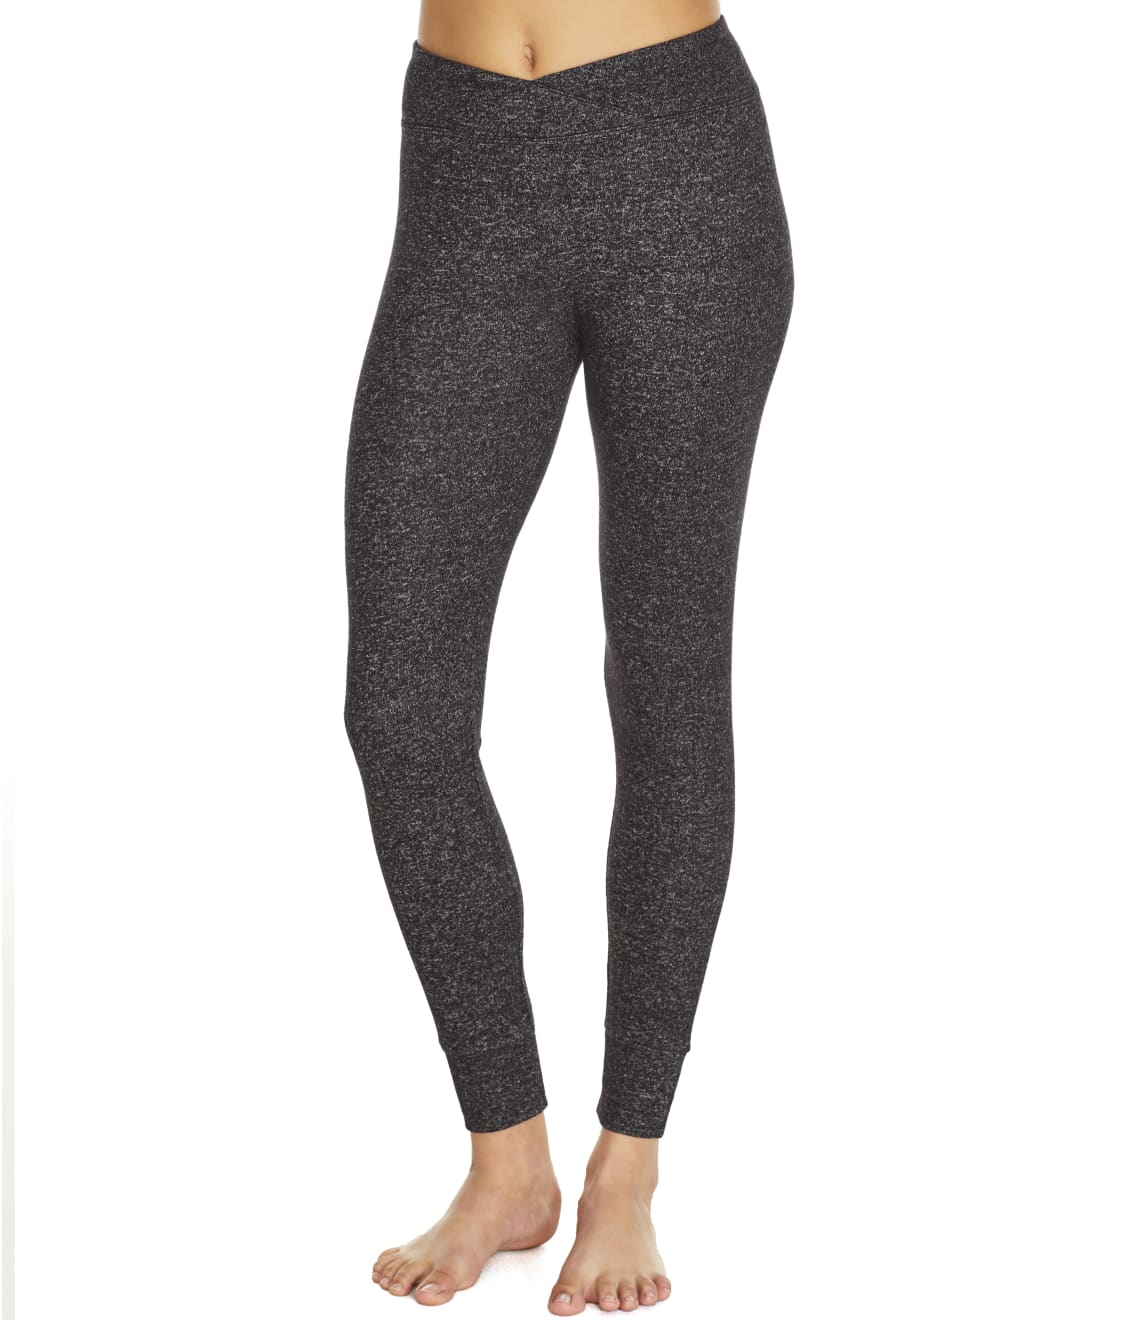 Cuddl Duds Soft Knit Leggings & Reviews | Bare Necessities (Style ...